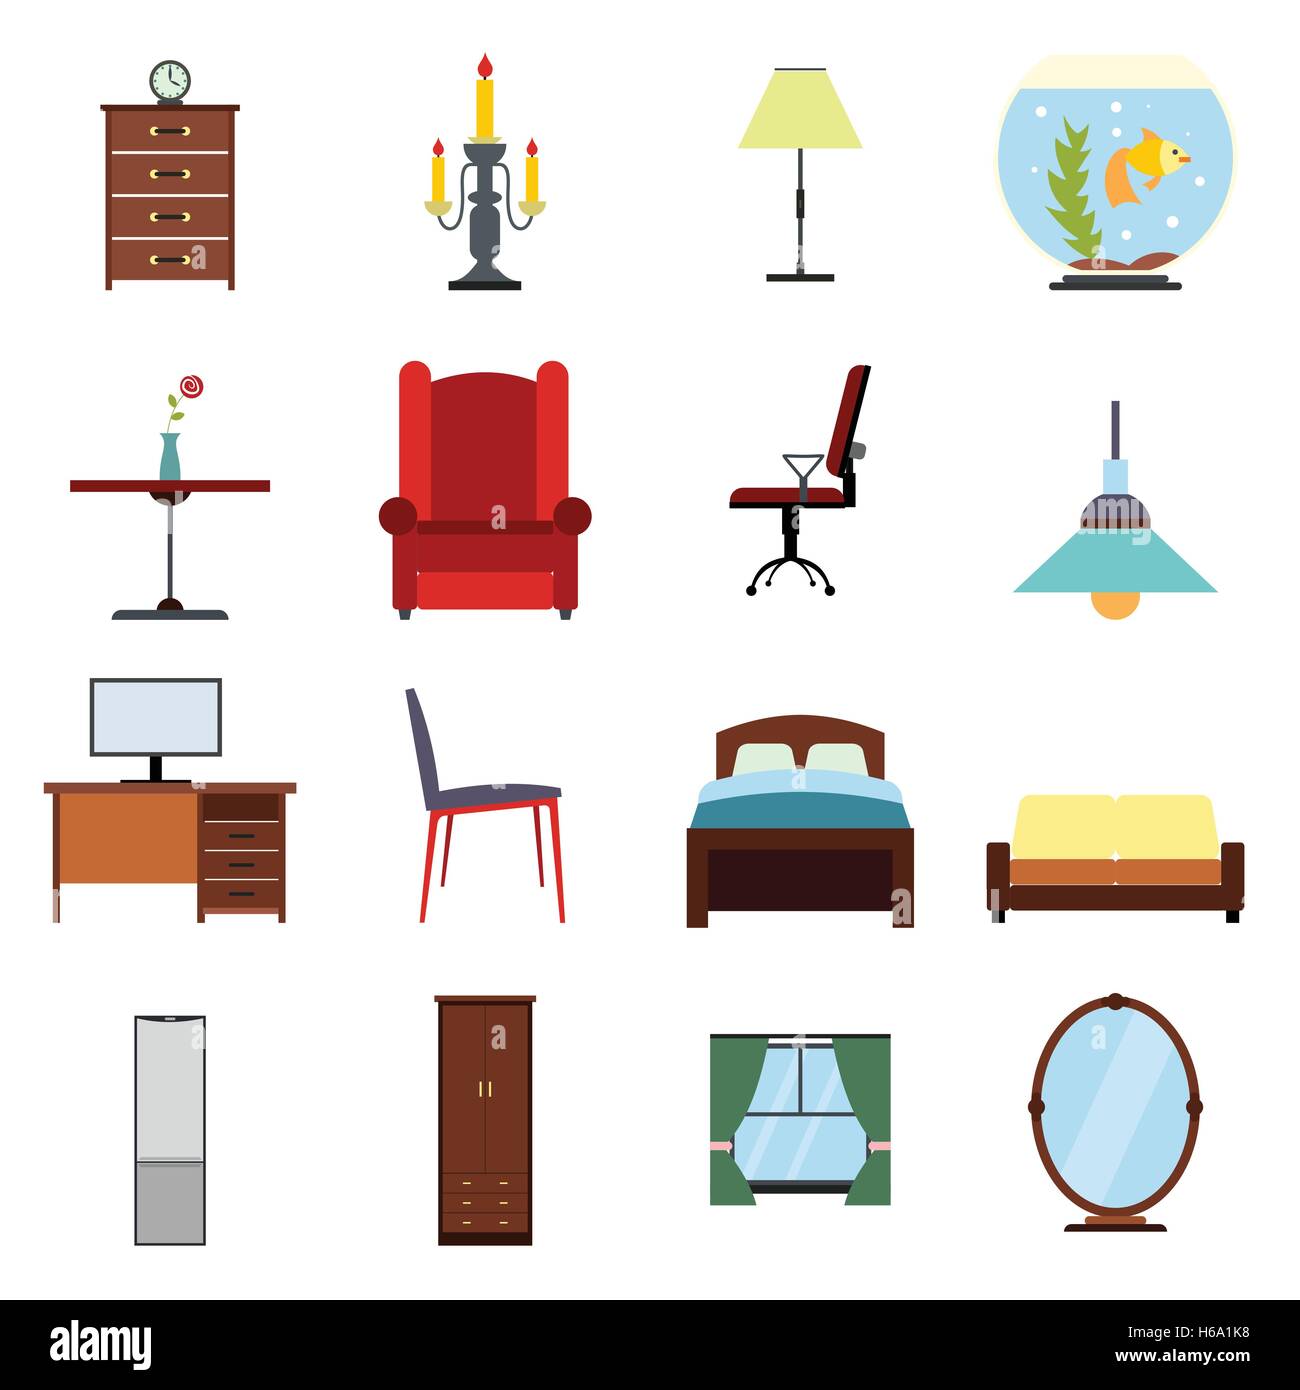 Furniture flat icons set Stock Vector